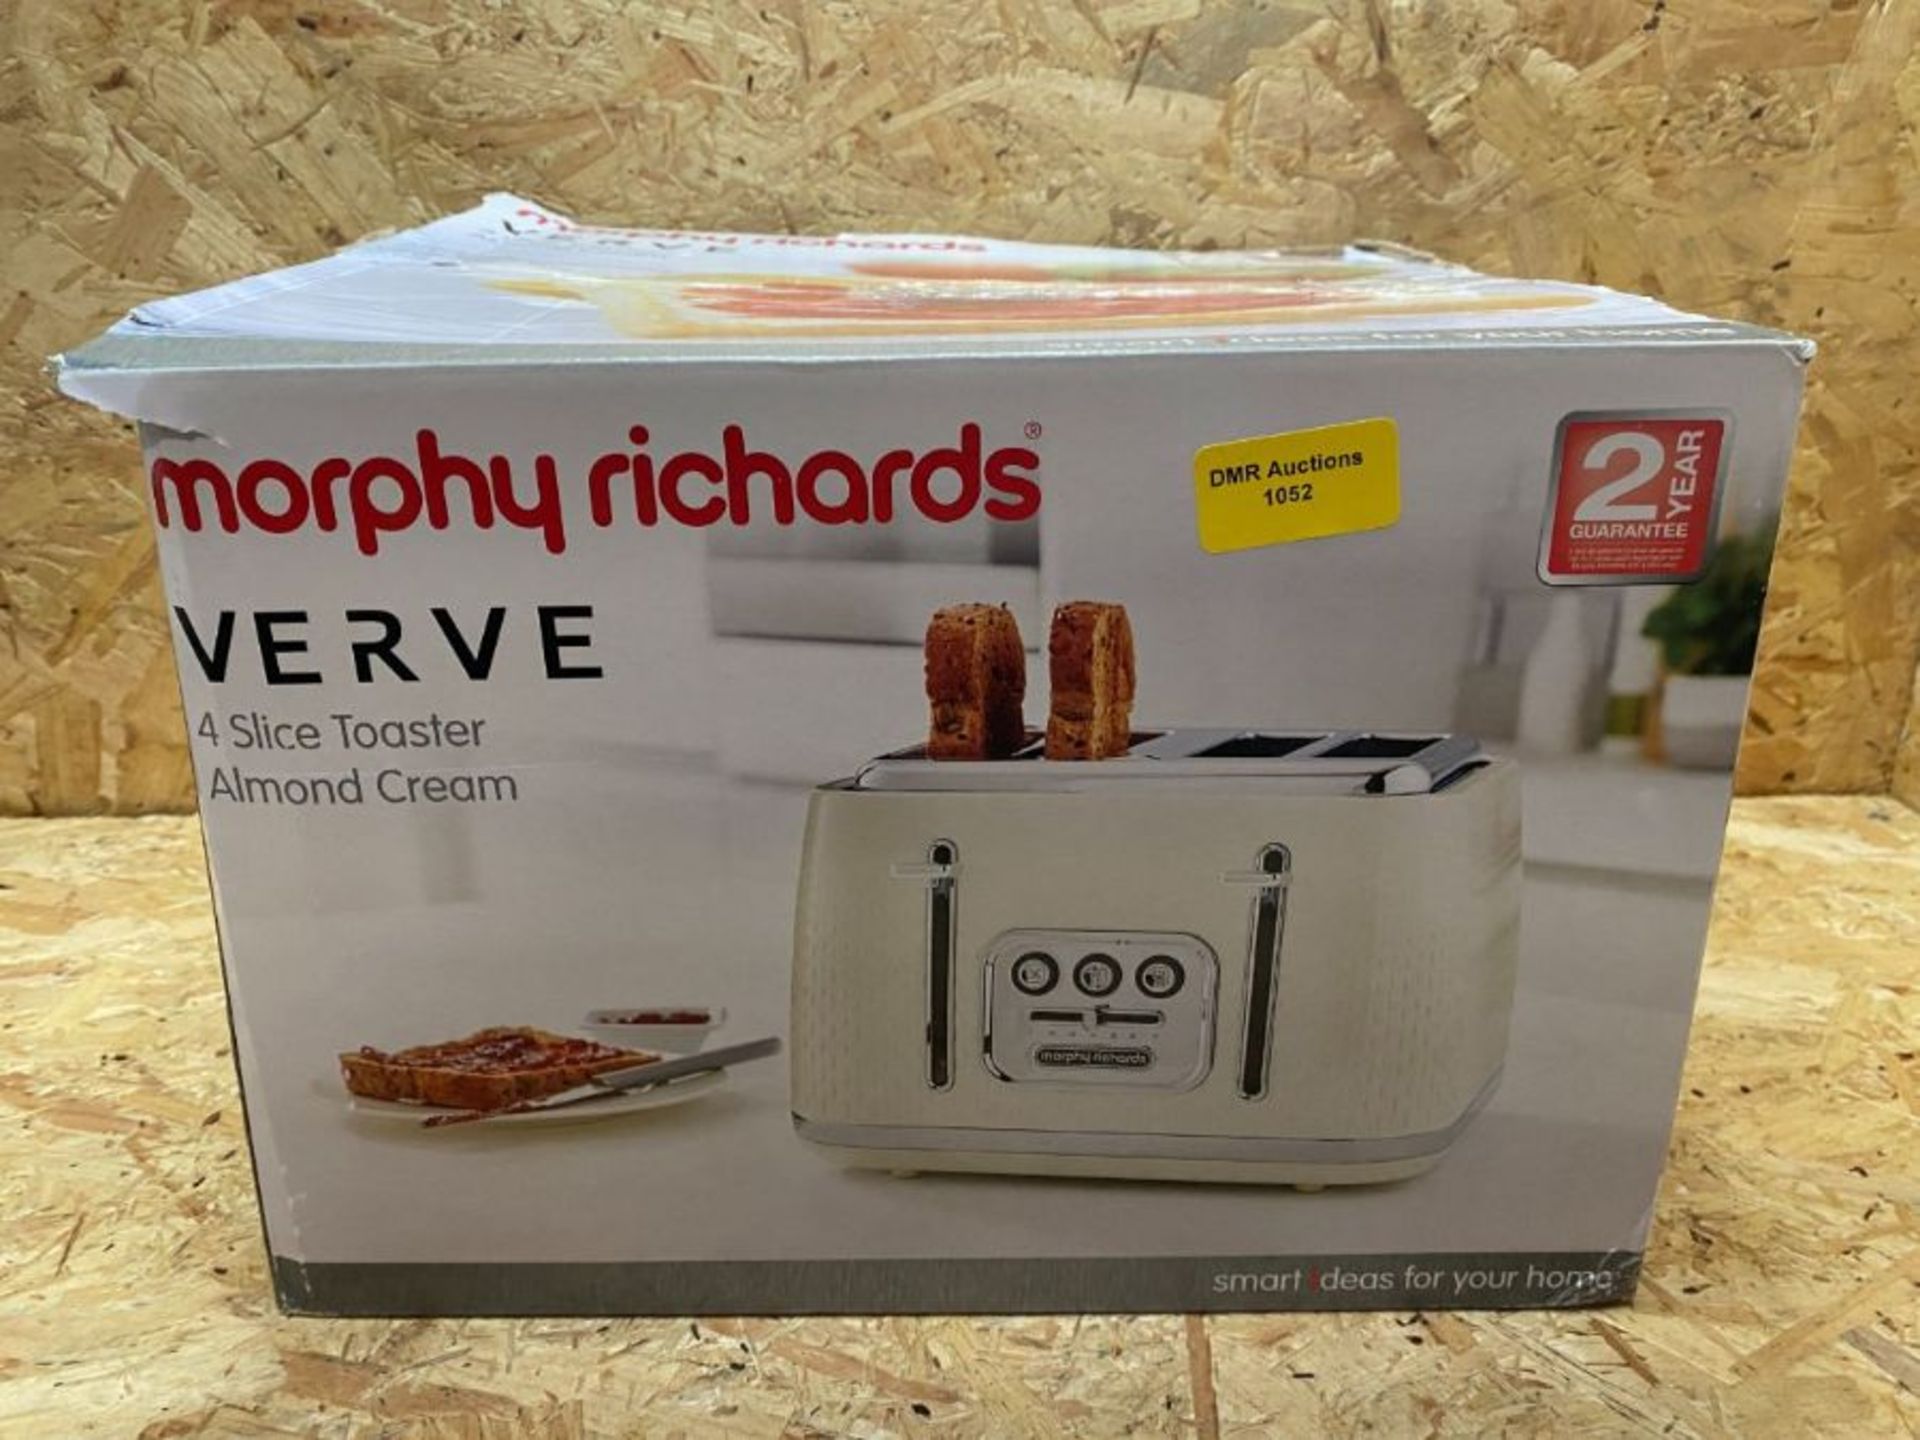 1 X MORPHY RICHARDS VERVE 4 SLICE TOASTER - UNTESTED CUSTOMER RETURNS - APPRAISALS AVAILABLE ON